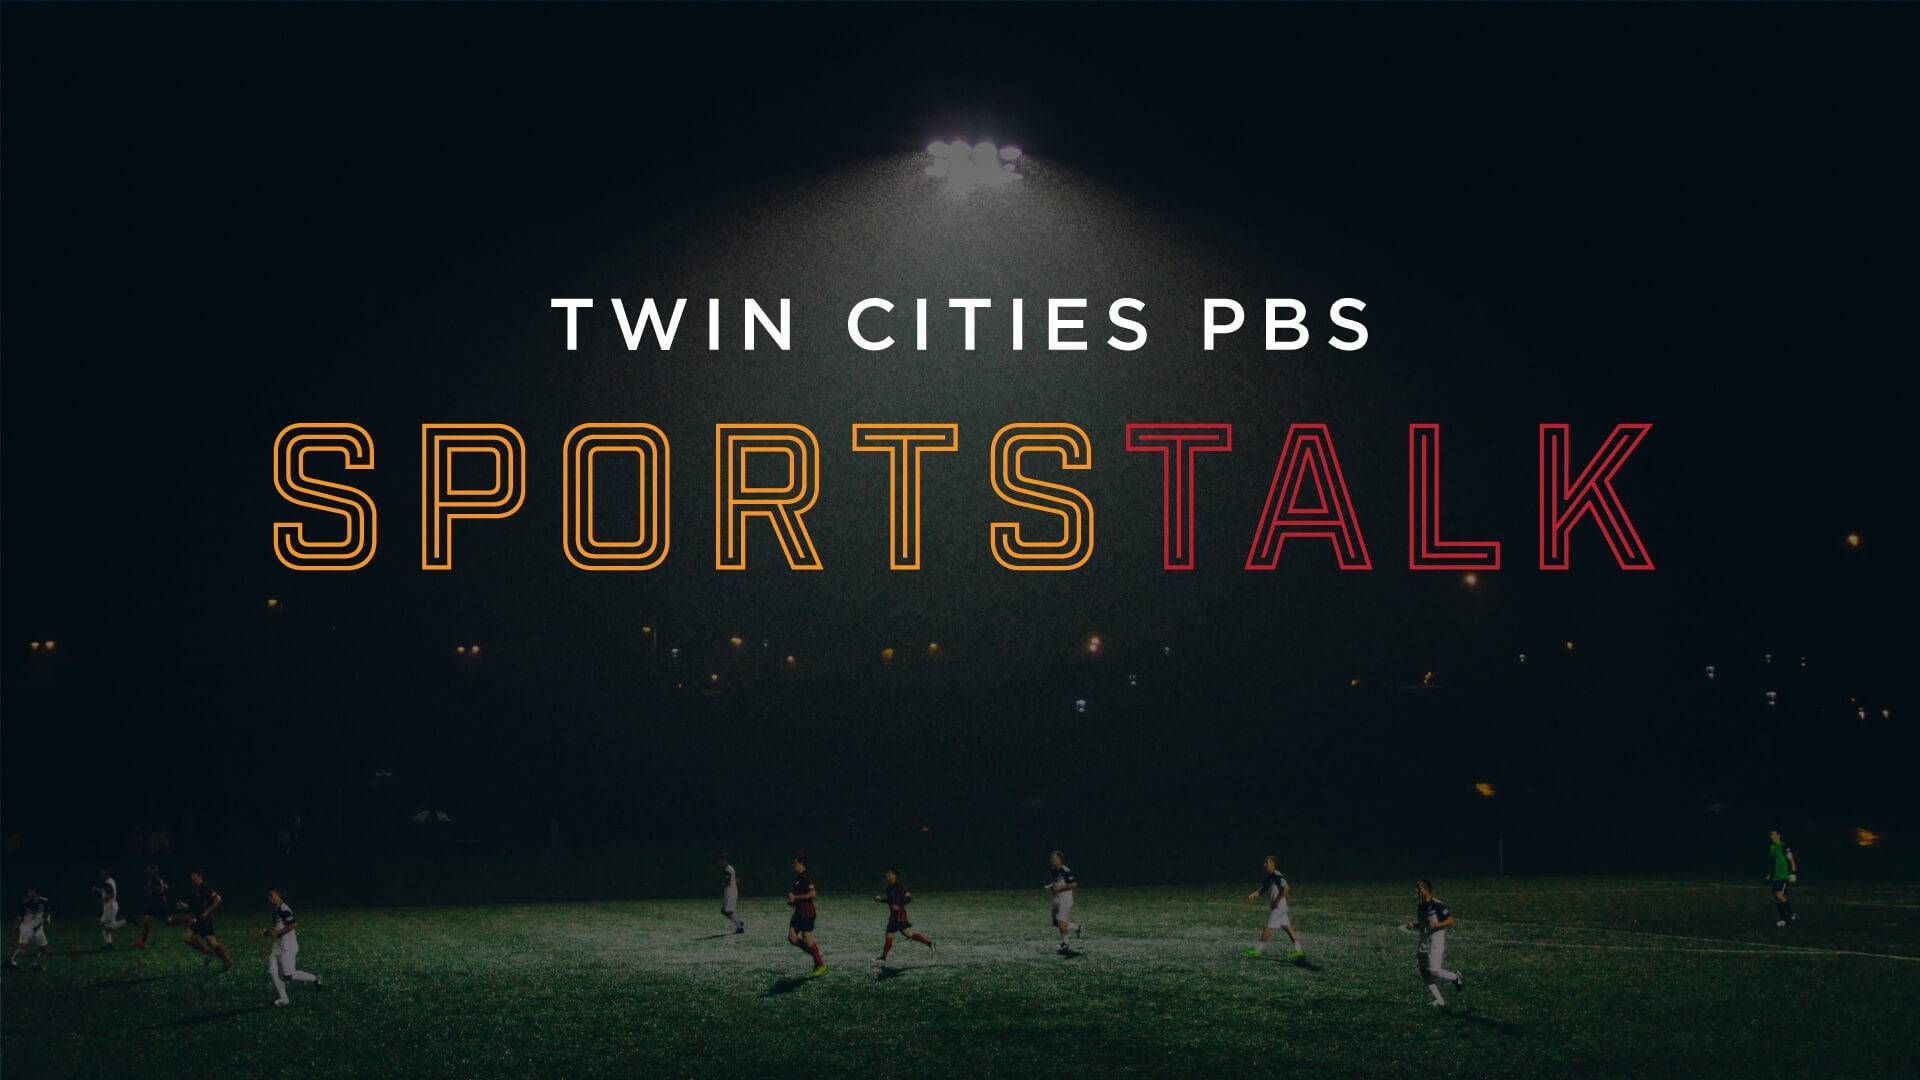 A title written in white, orange and red text reads "Twin Cities PBS Sportstalk" and is laid over a faded image of people playing soccer at night.  A bright light illuminates the field. 